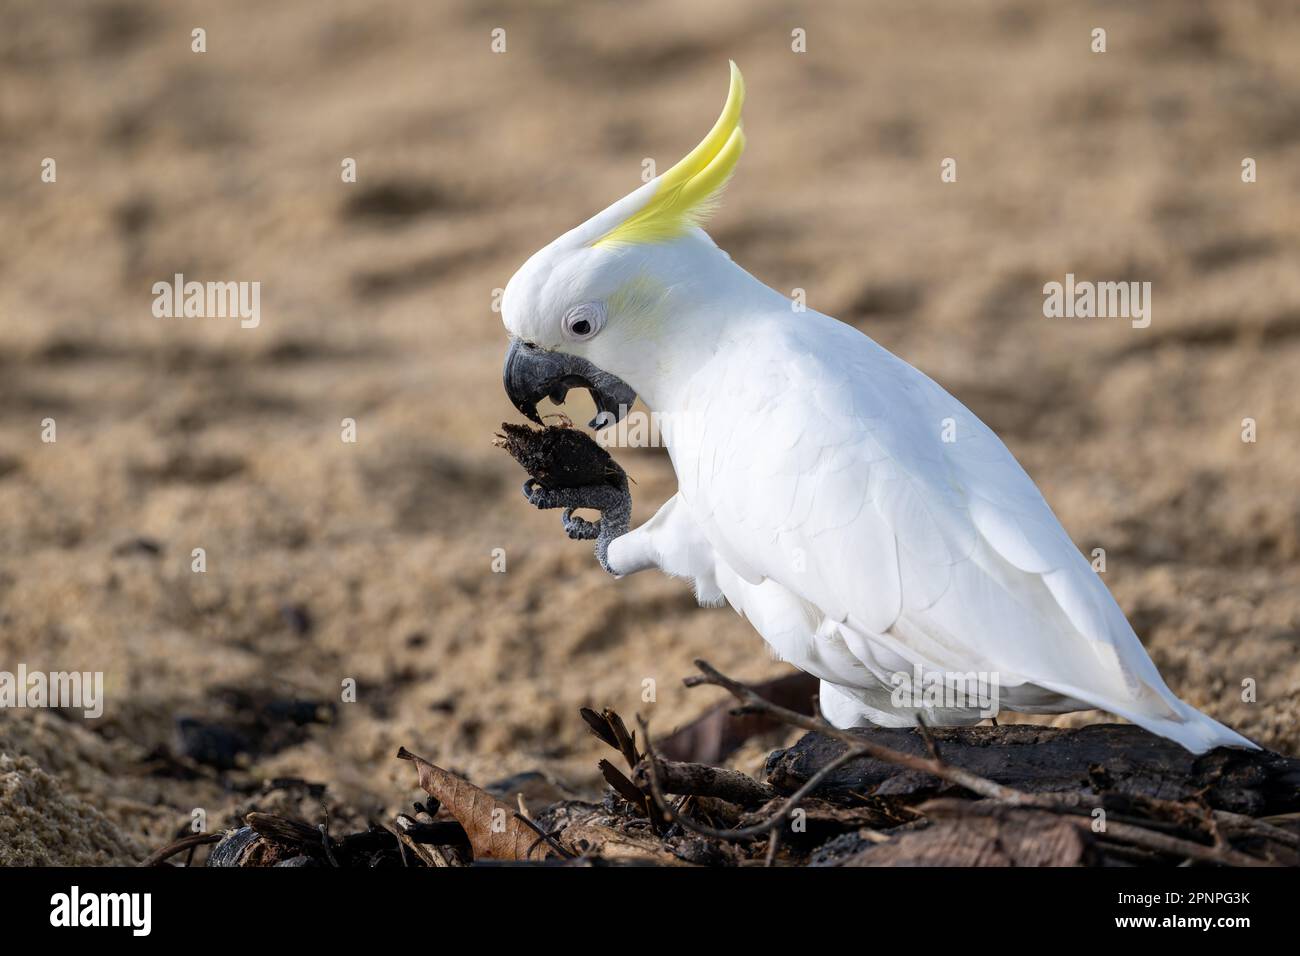 A single Sulphur-crested Cockatoo sits on the Palm Cove sand in Cairns, about to crack open the beach almond nut clasped in a claw with its open beak. Stock Photo